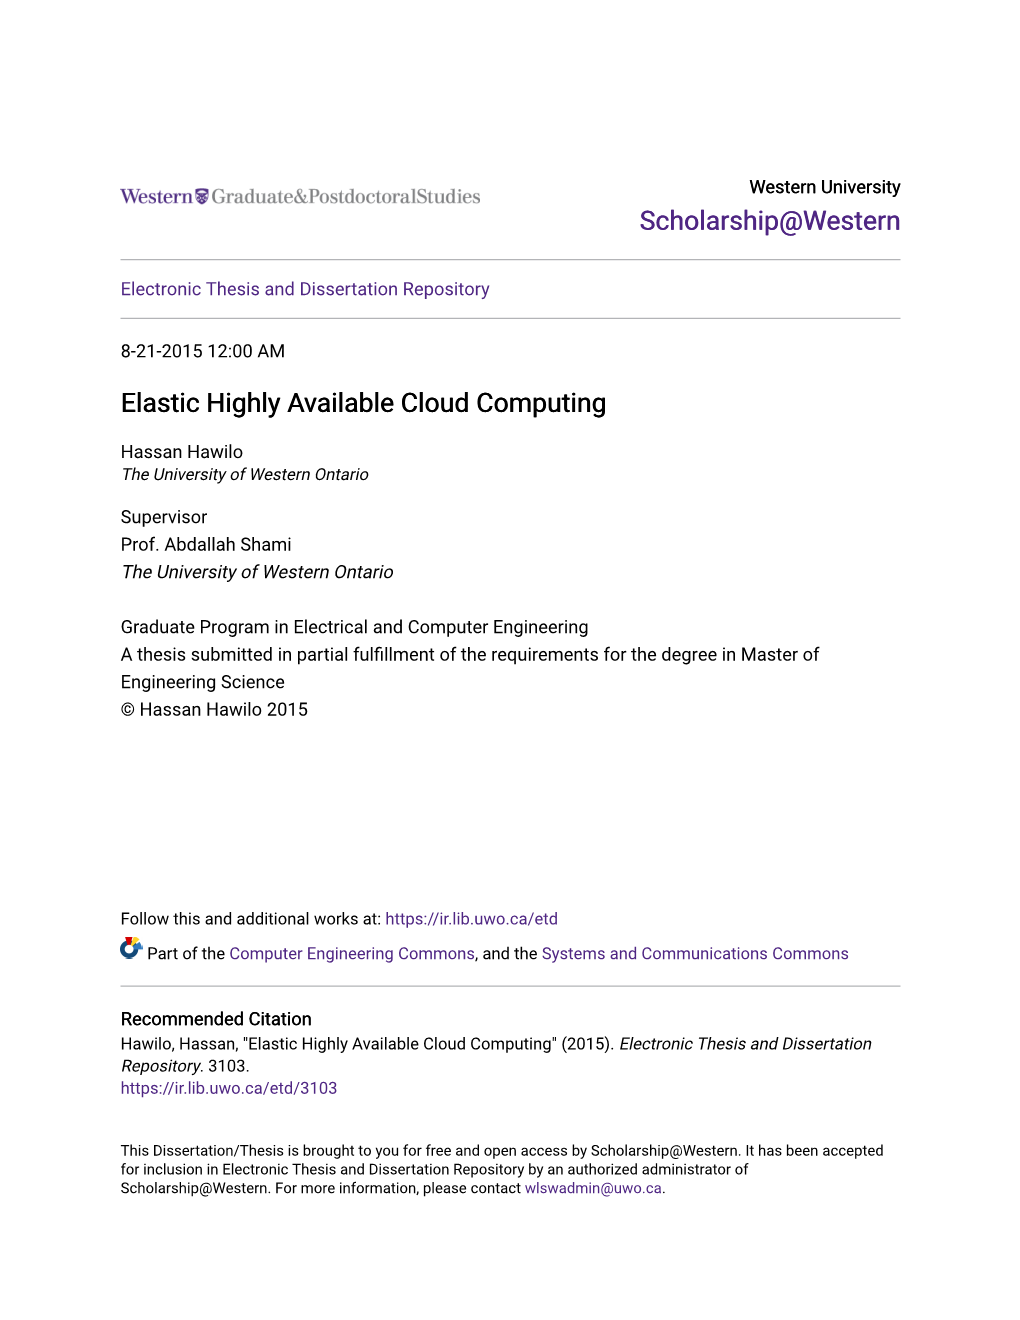 Elastic Highly Available Cloud Computing